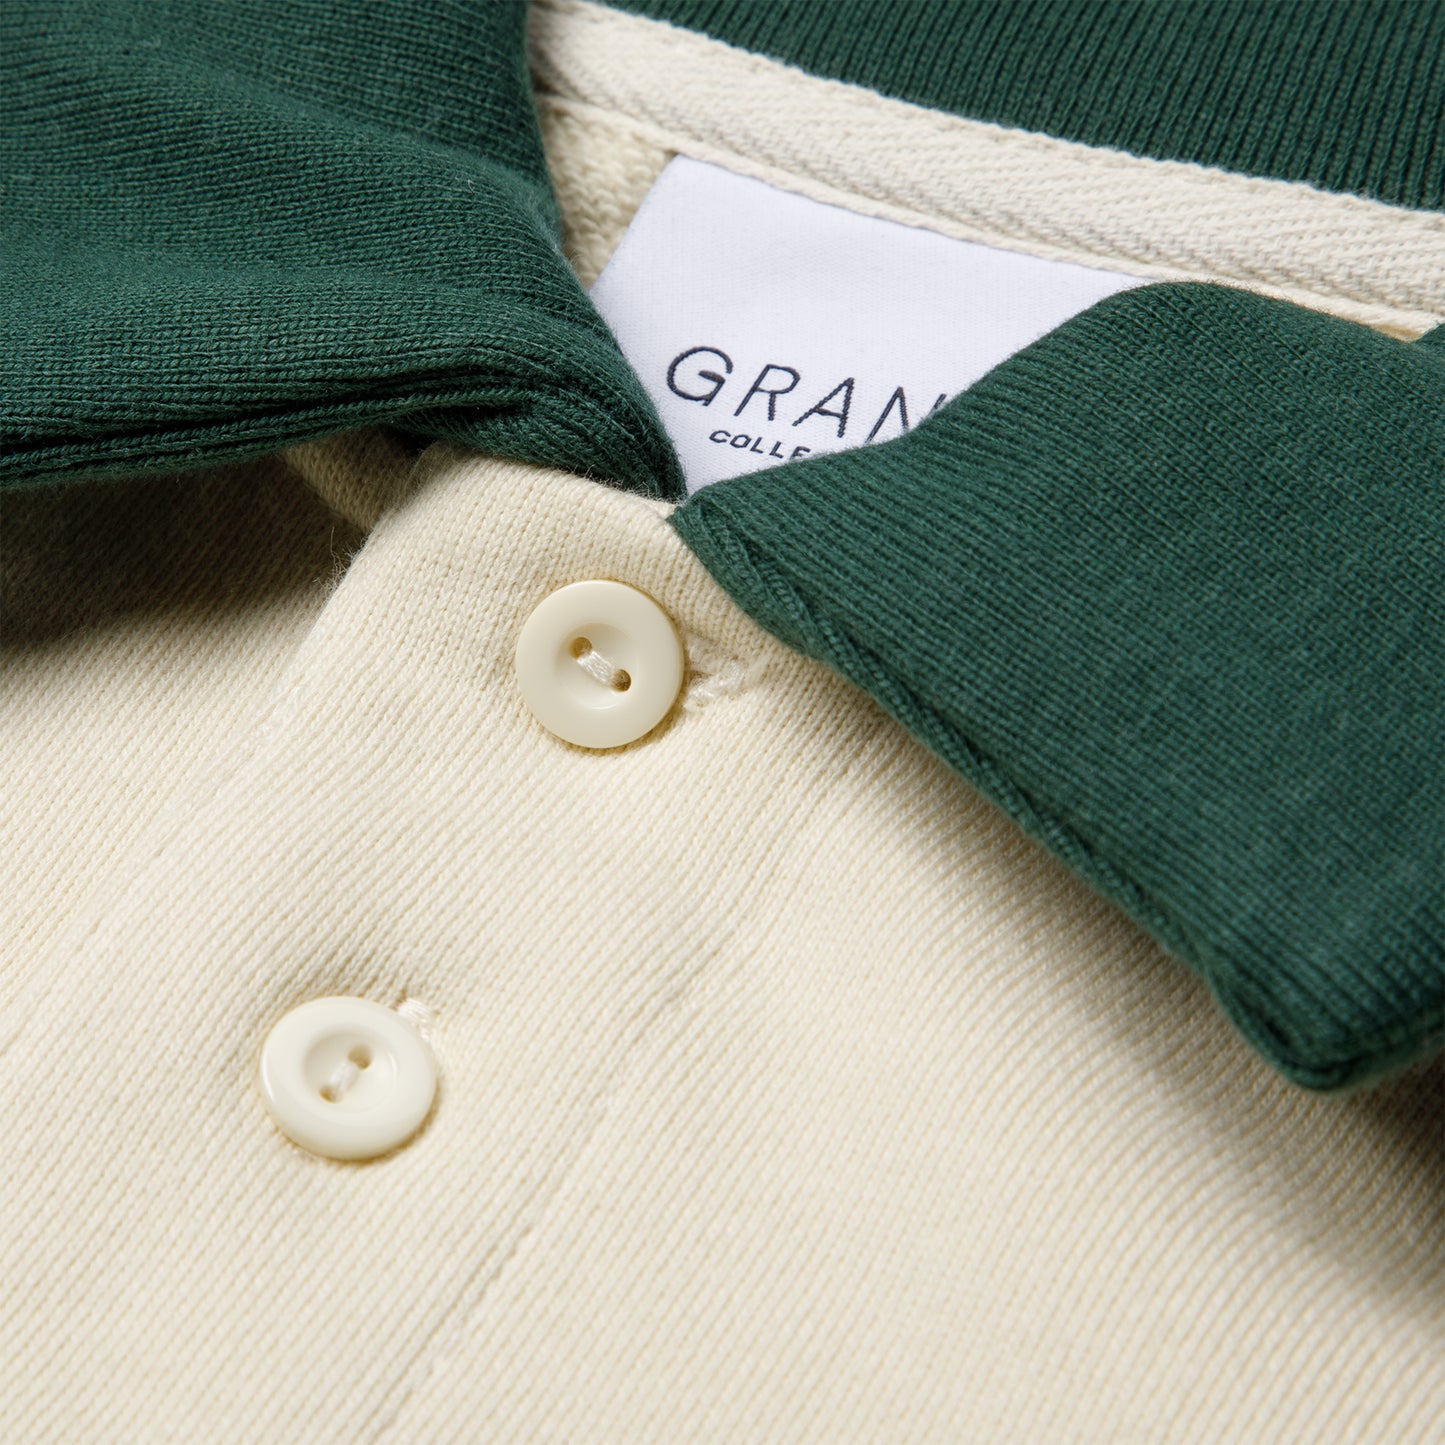 Grand Collection Collared Sweat Shirt (Cream/Forest)